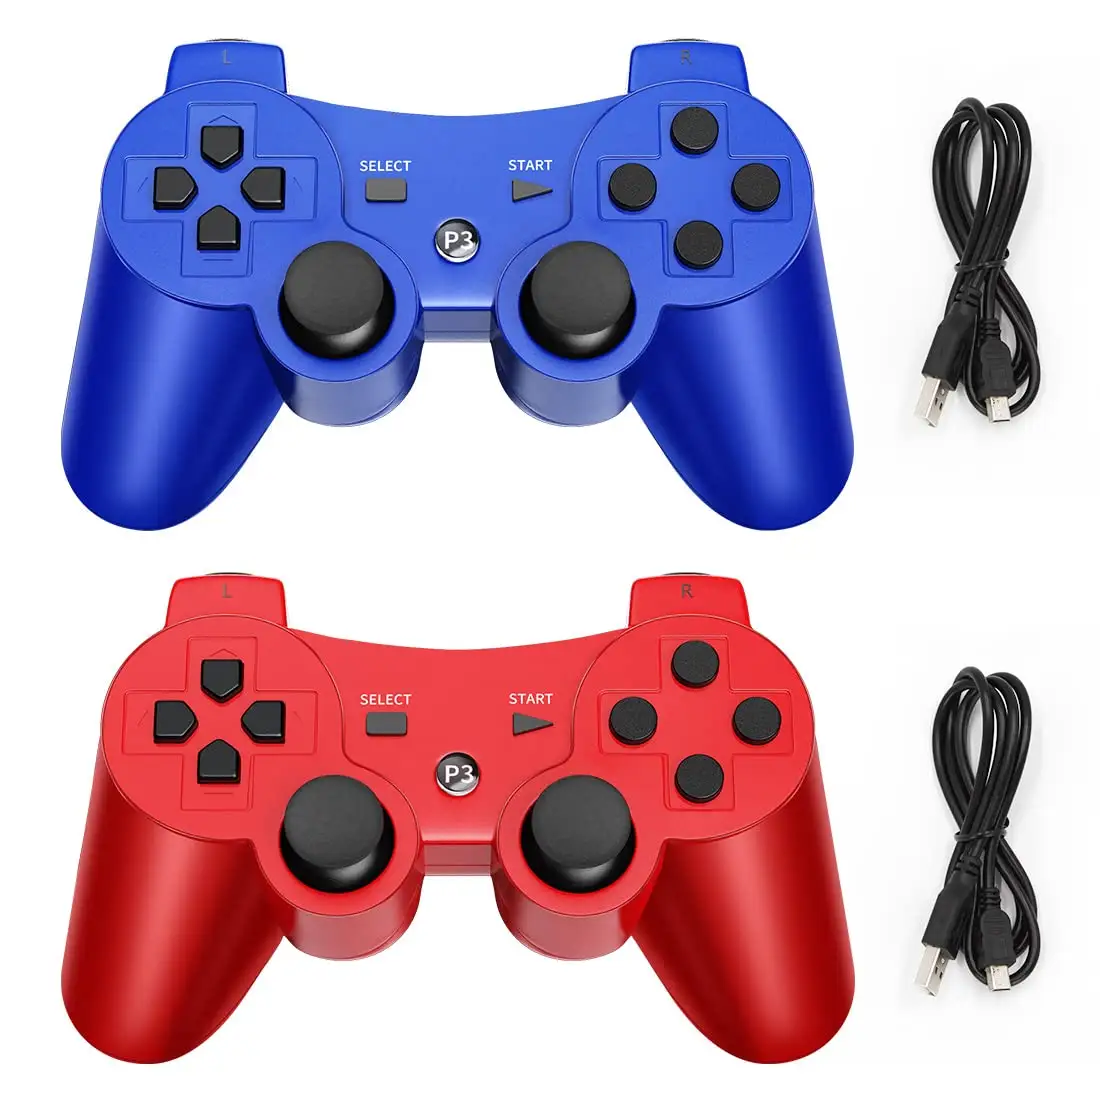 PS3 Wireless Controller PS3 Gamepad for Playstation 3, Double Shock and 6-Axis for PS3 Controller 2 Pack